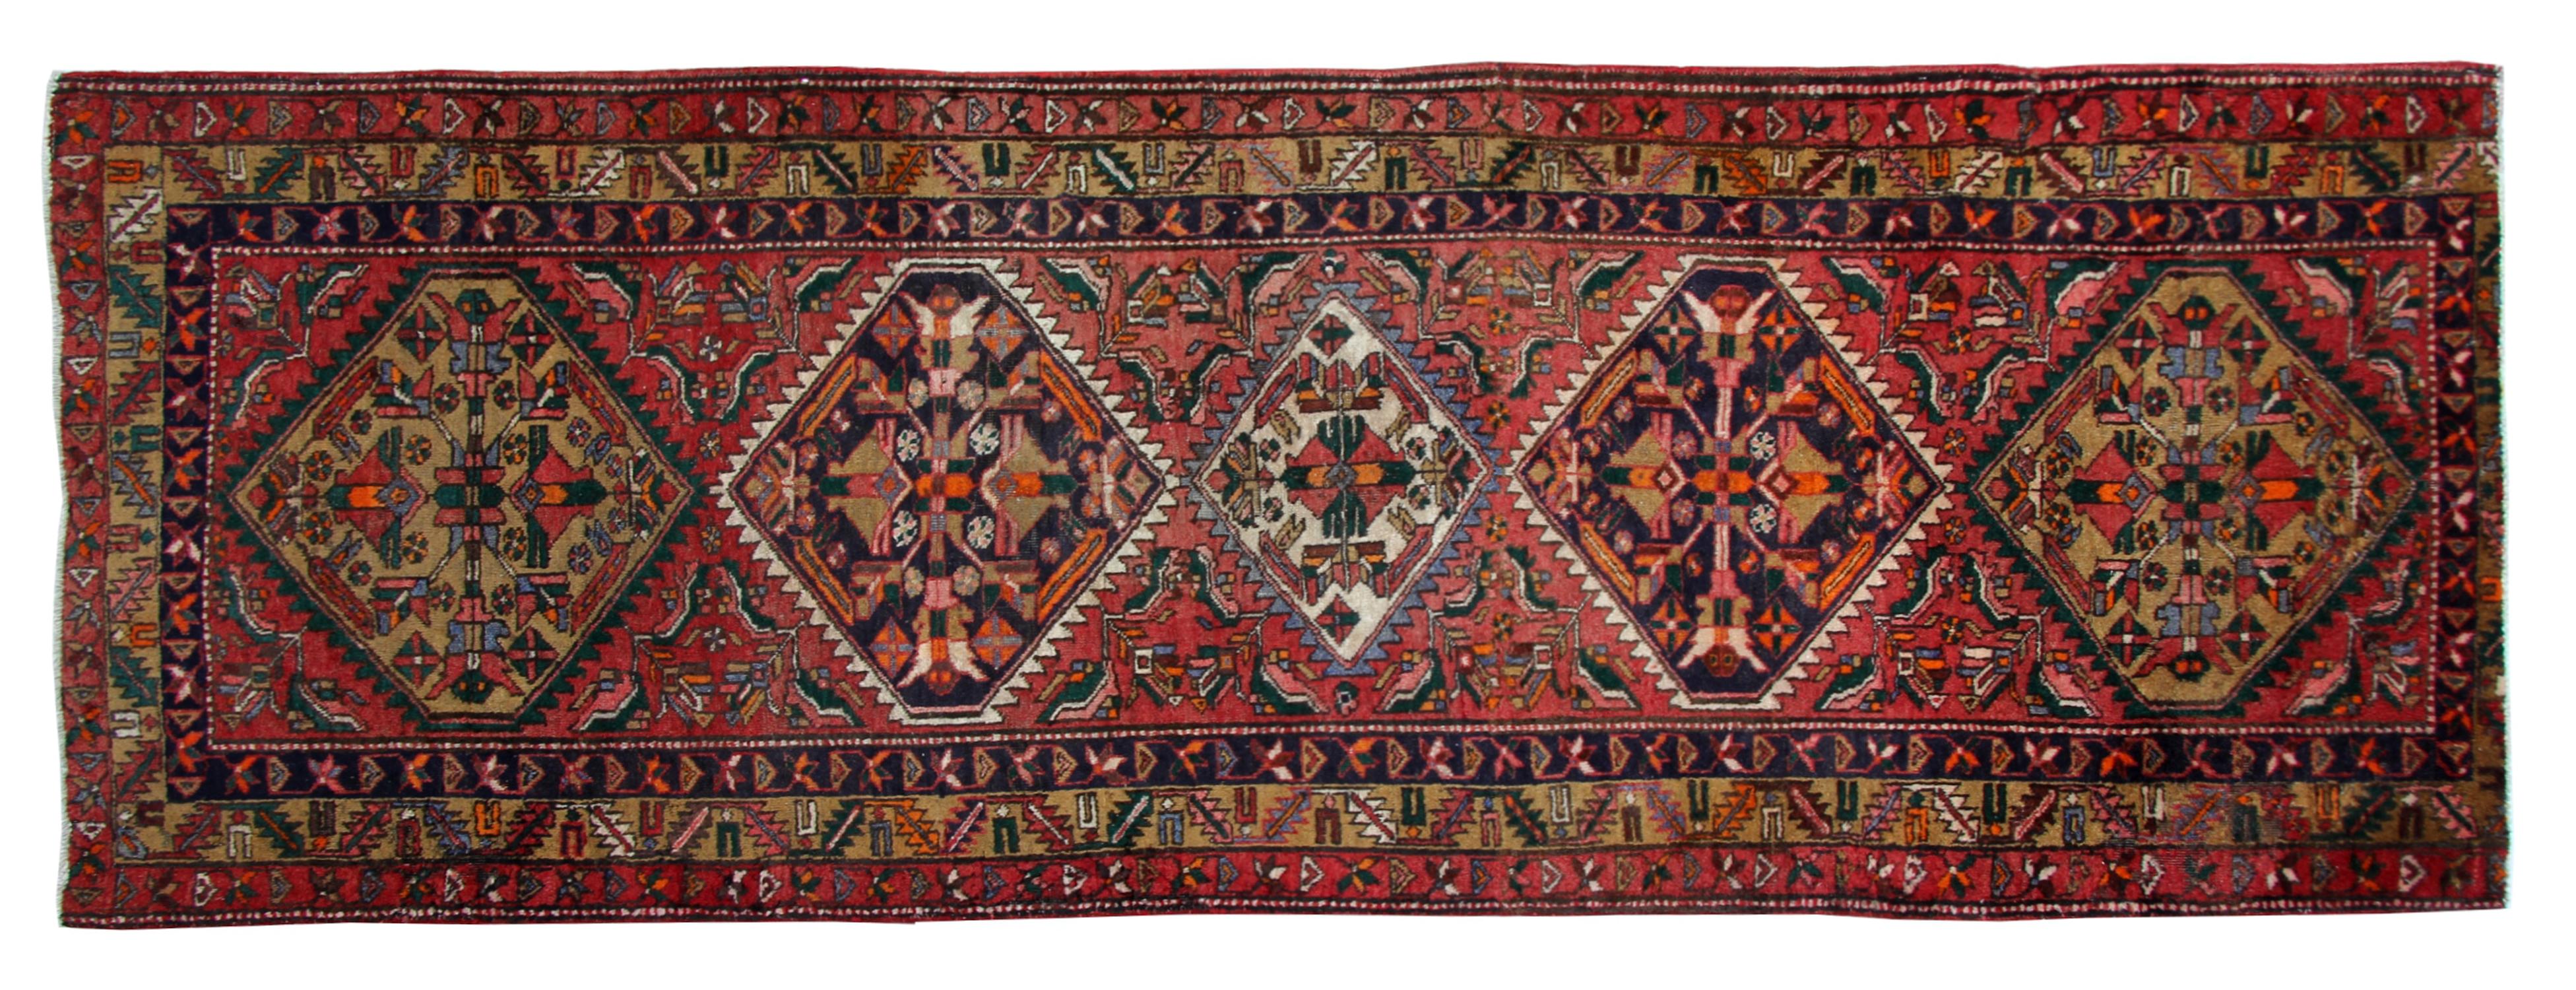 This fine wool runner rug is a fine example of vintage rugs from the 1960s. Constructed with a simple red cream colour palette. Then the repeat tribal floral design is woven in a deep blue background in brown, orange and ivory accents. A decorative